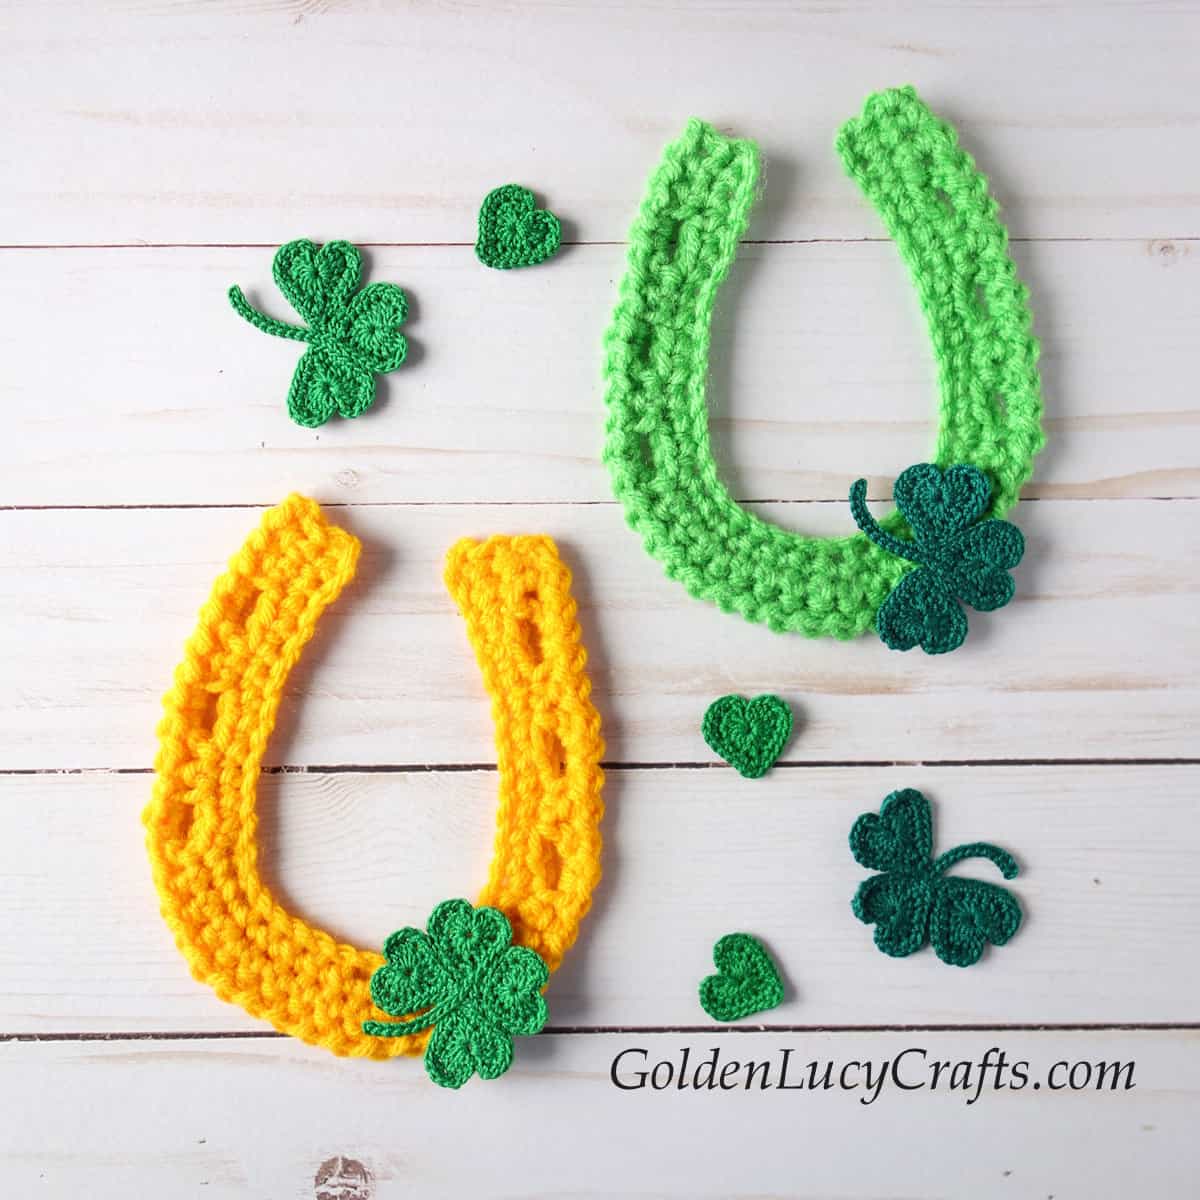 Two crocheted horseshoe appliques embellished with clovers.